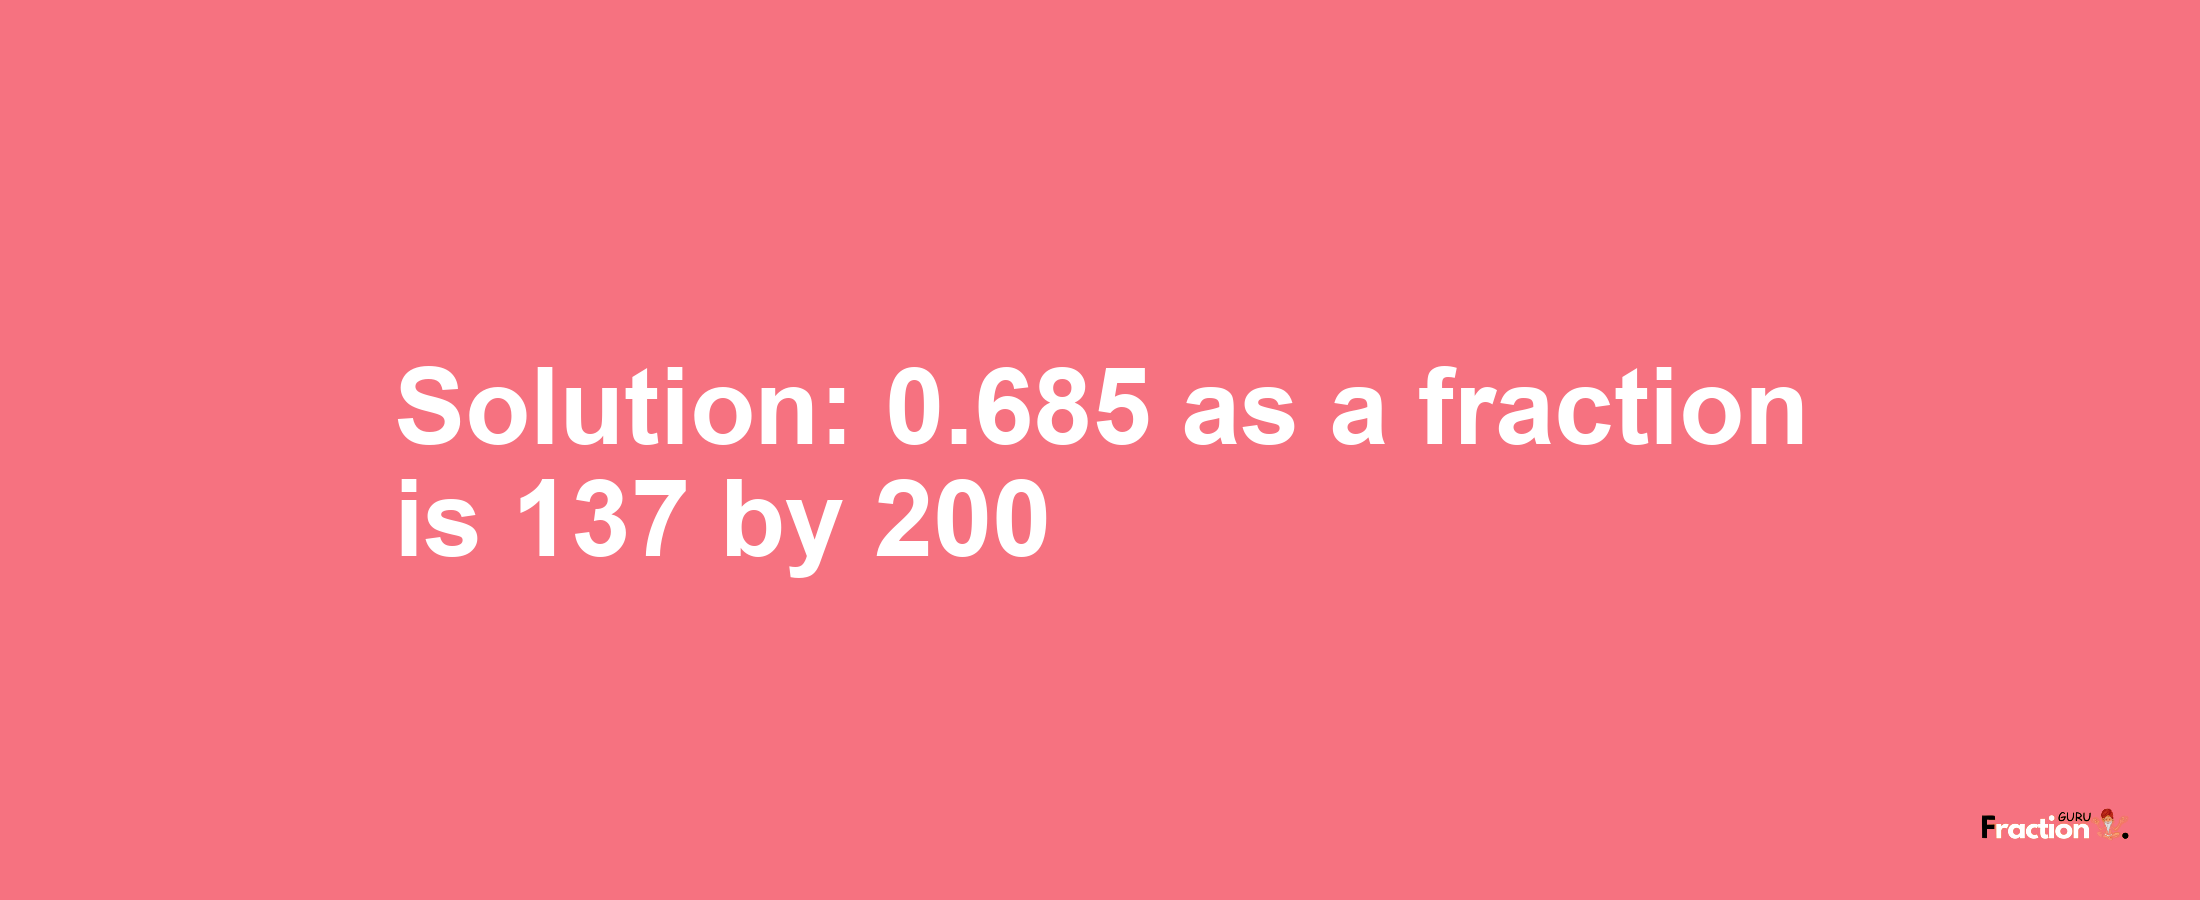 Solution:0.685 as a fraction is 137/200